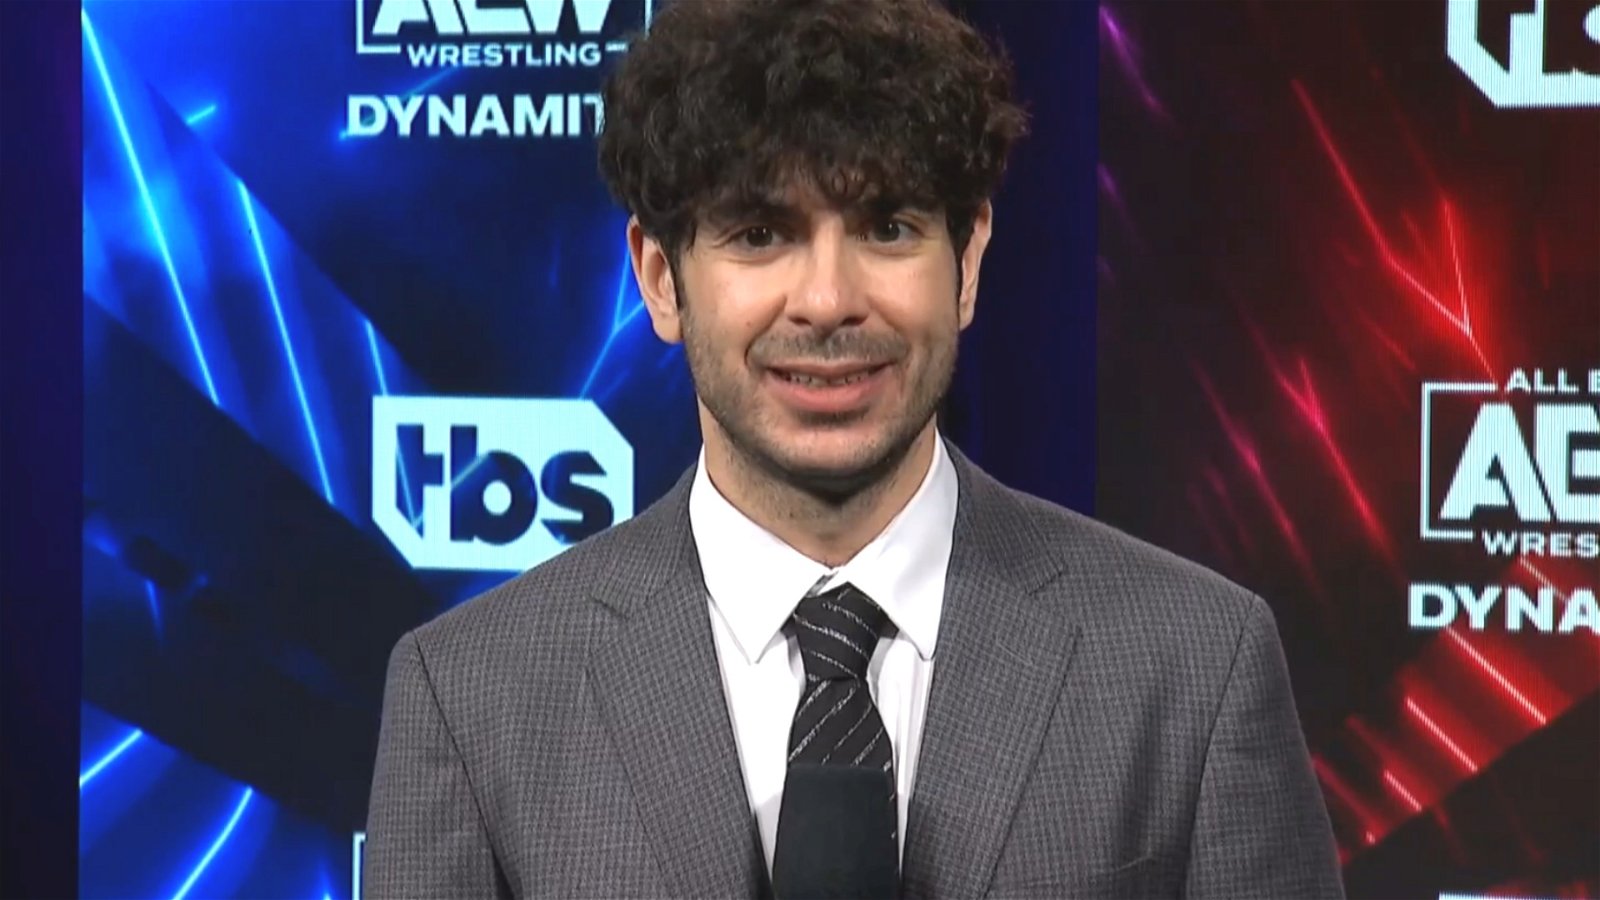 AEW’s Tony Khan Discusses WWE, TNA & STARDOM Making Executive Changes